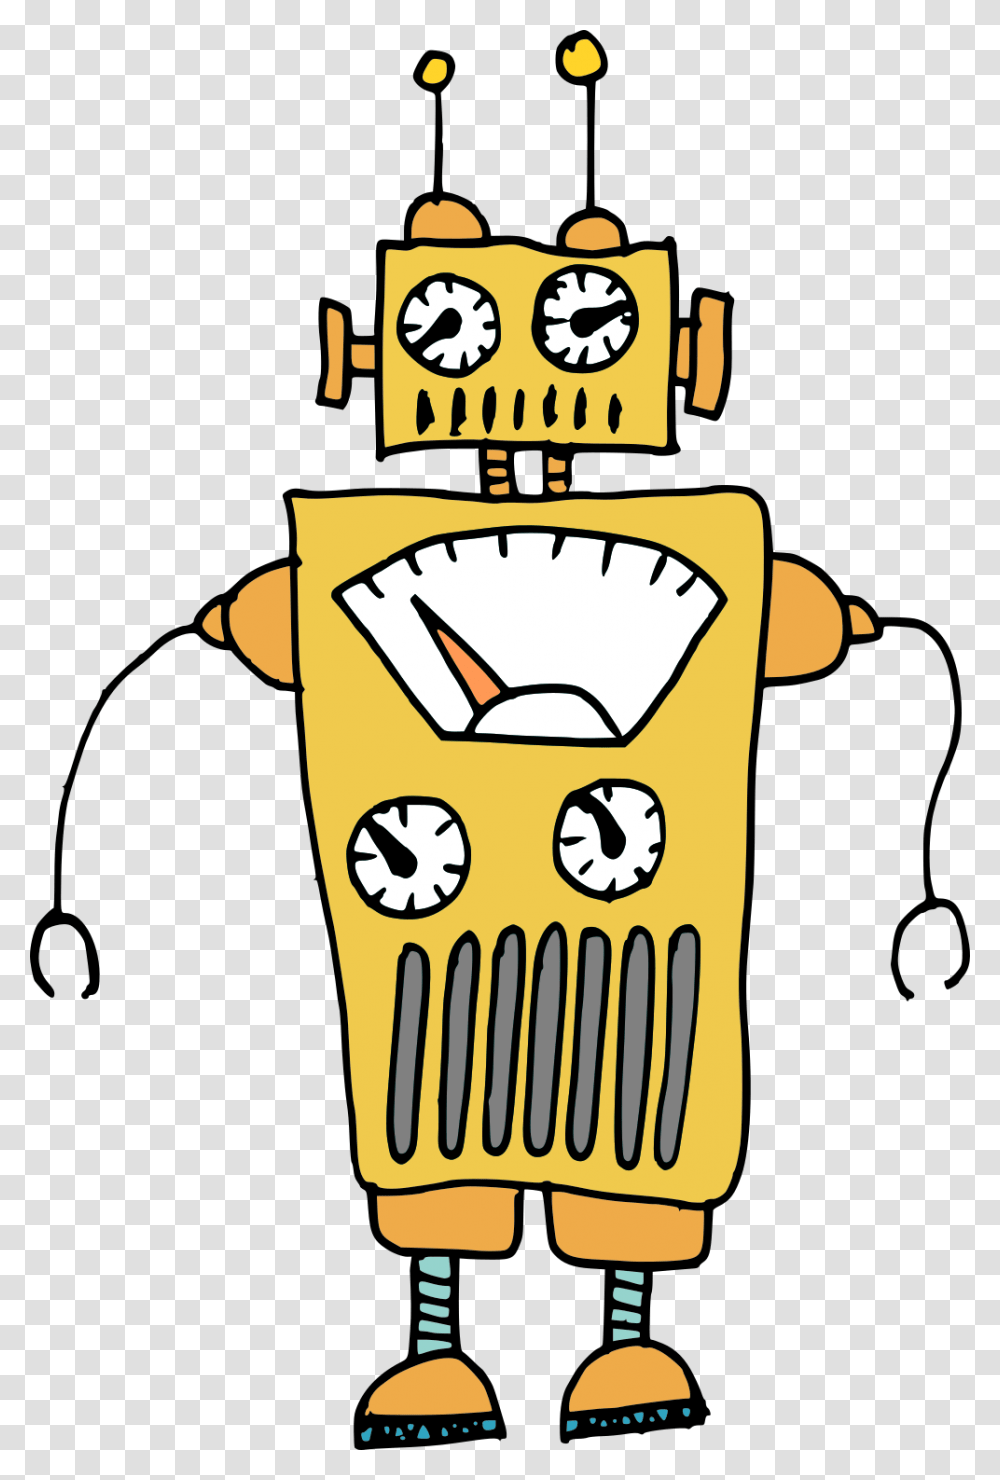 Silly Cartoon Robot Vector, Hydrant, Analog Clock, Fire Hydrant Transparent Png